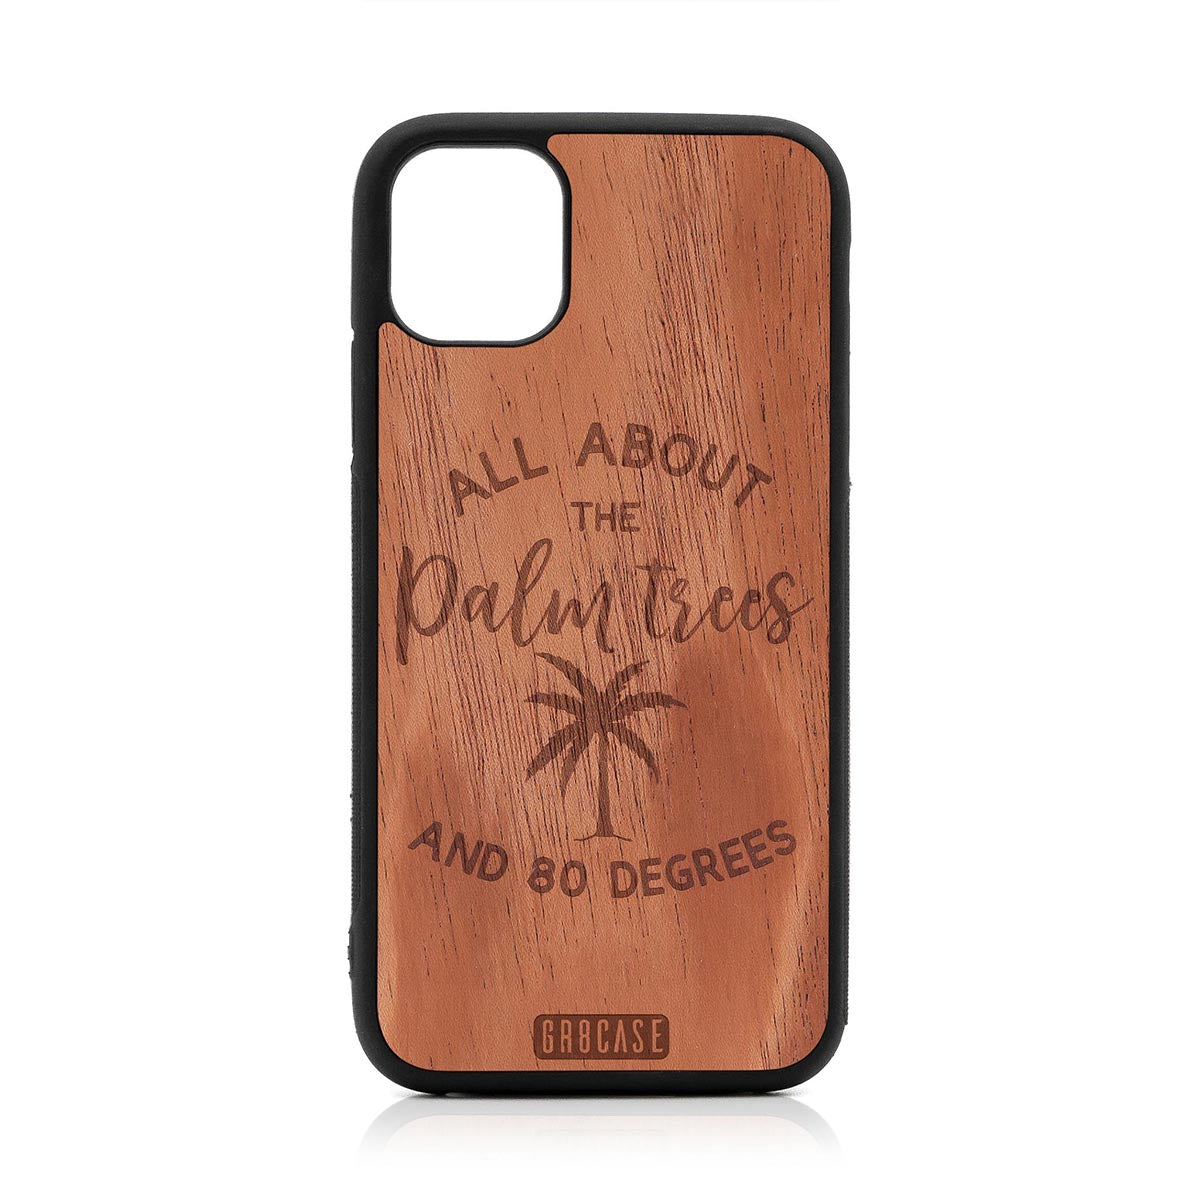 All About The Palm Trees and 80 Degrees Design Wood Case For iPhone 11 by GR8CASE